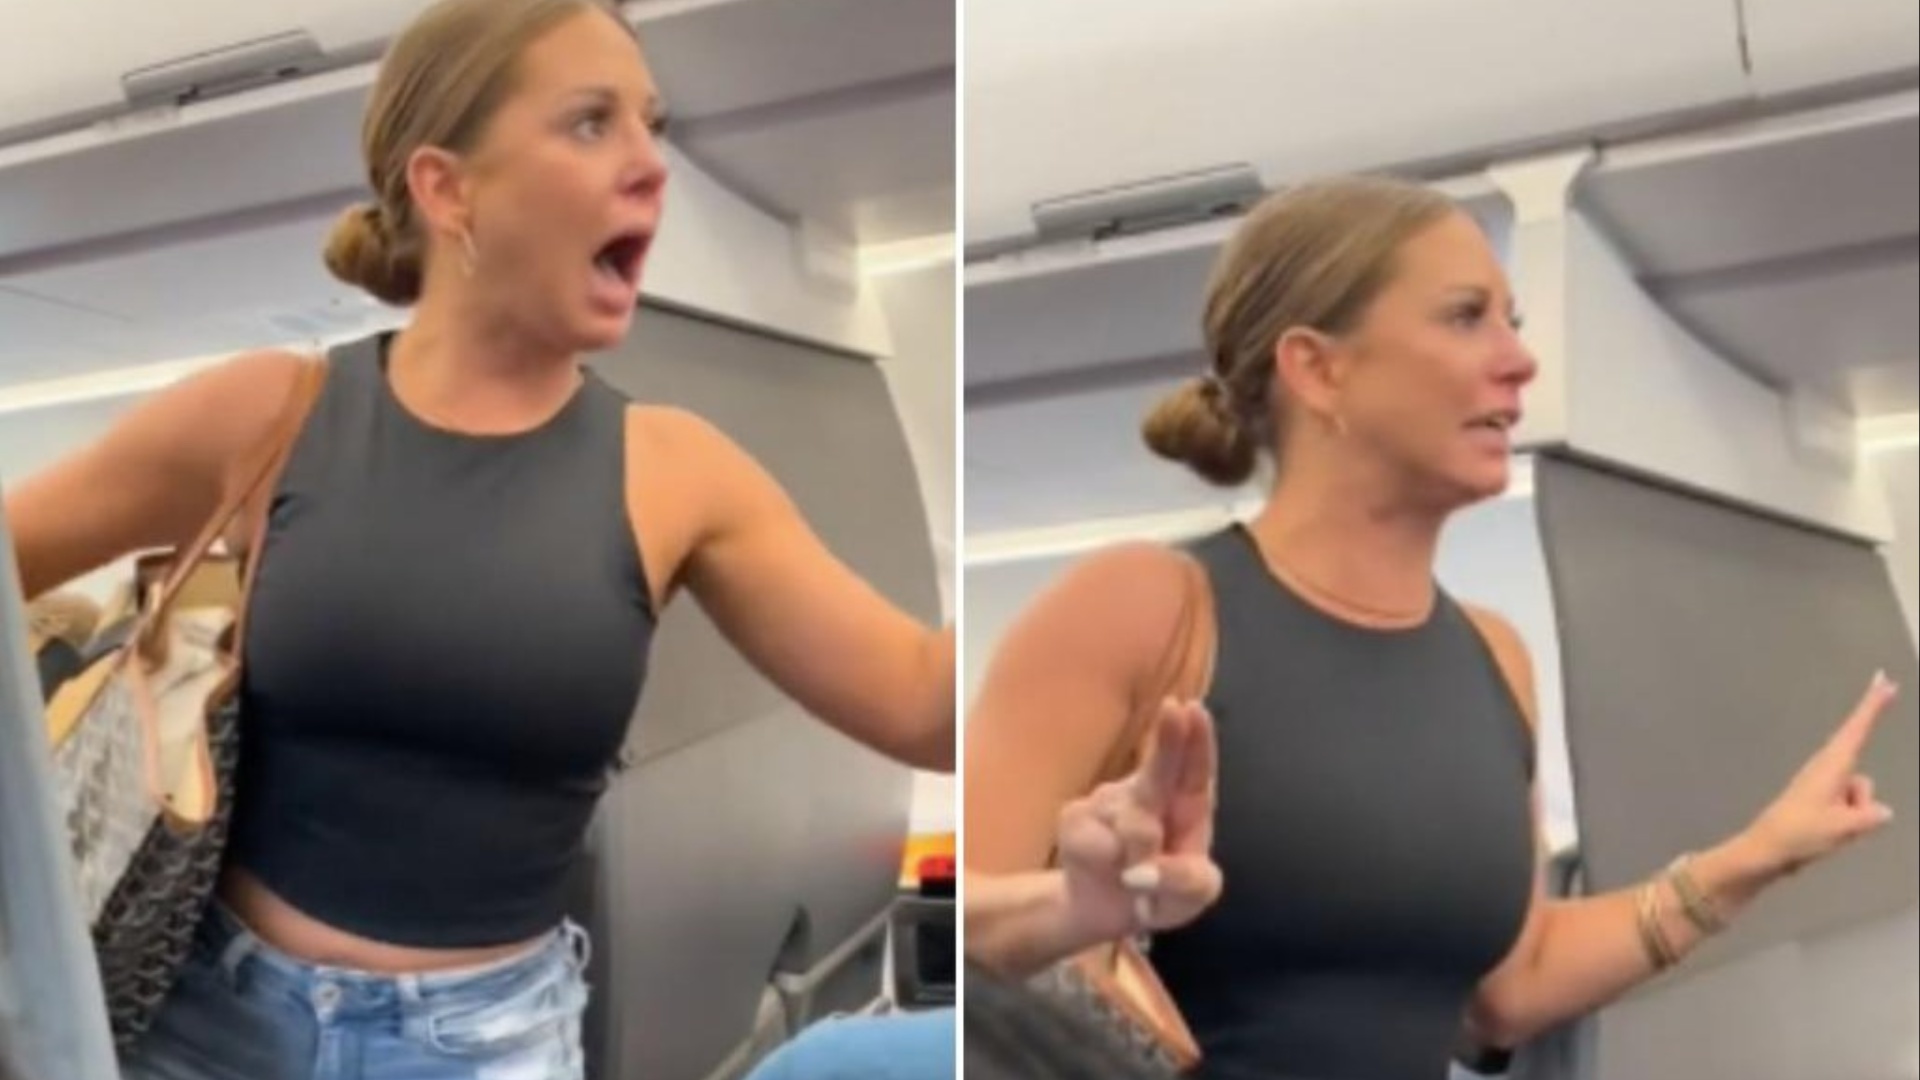 American Airlines Passenger in Viral Video goes missing Is it true?